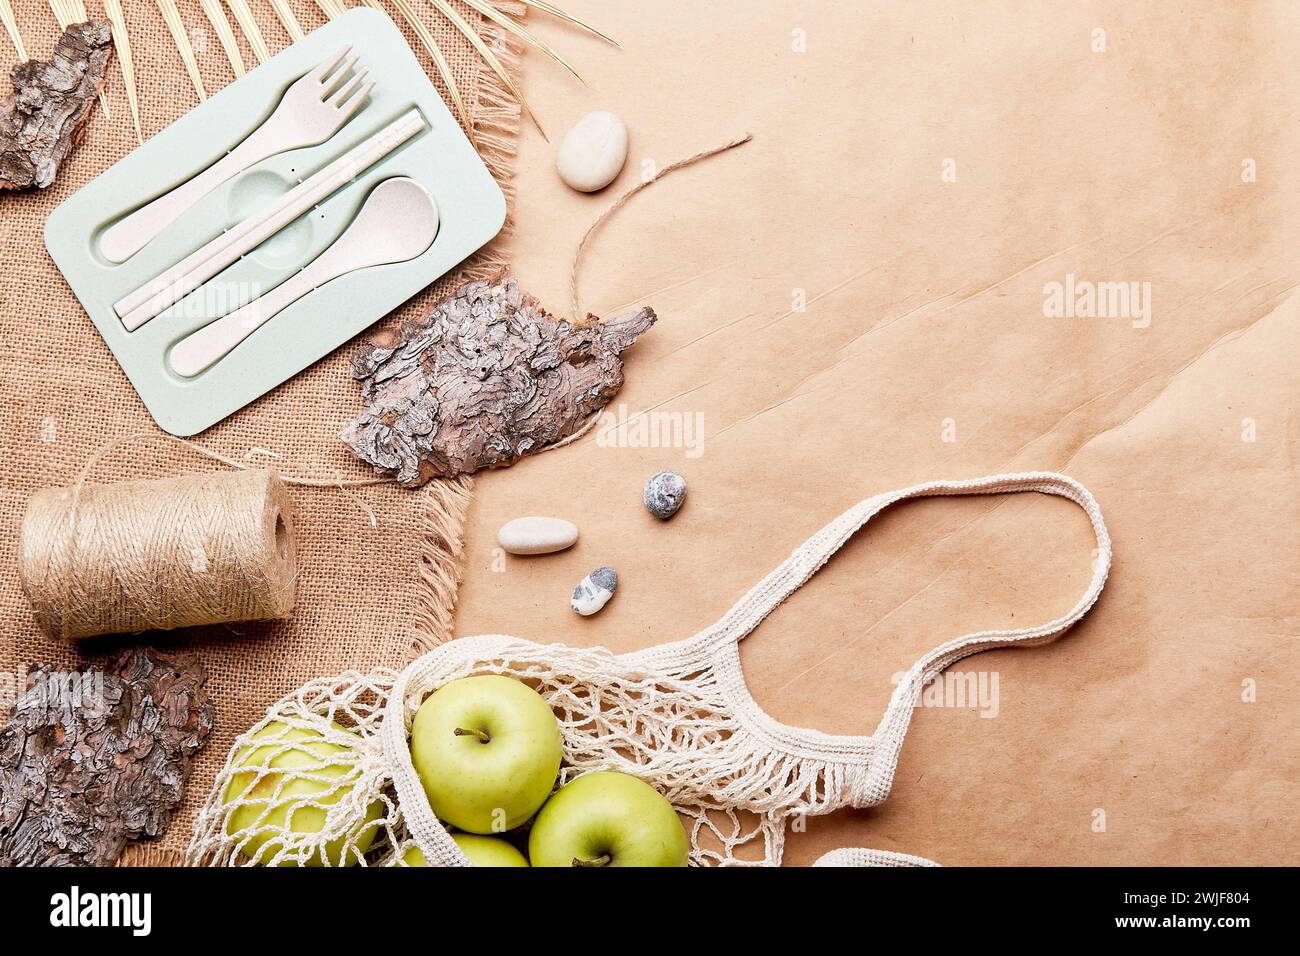 Aesthetic eco-friendly, zero waste, sustainable lifestyle background with reusable bag, cutlery, apples, tree bark, pebbles on crafting paper with cop Stock Photo